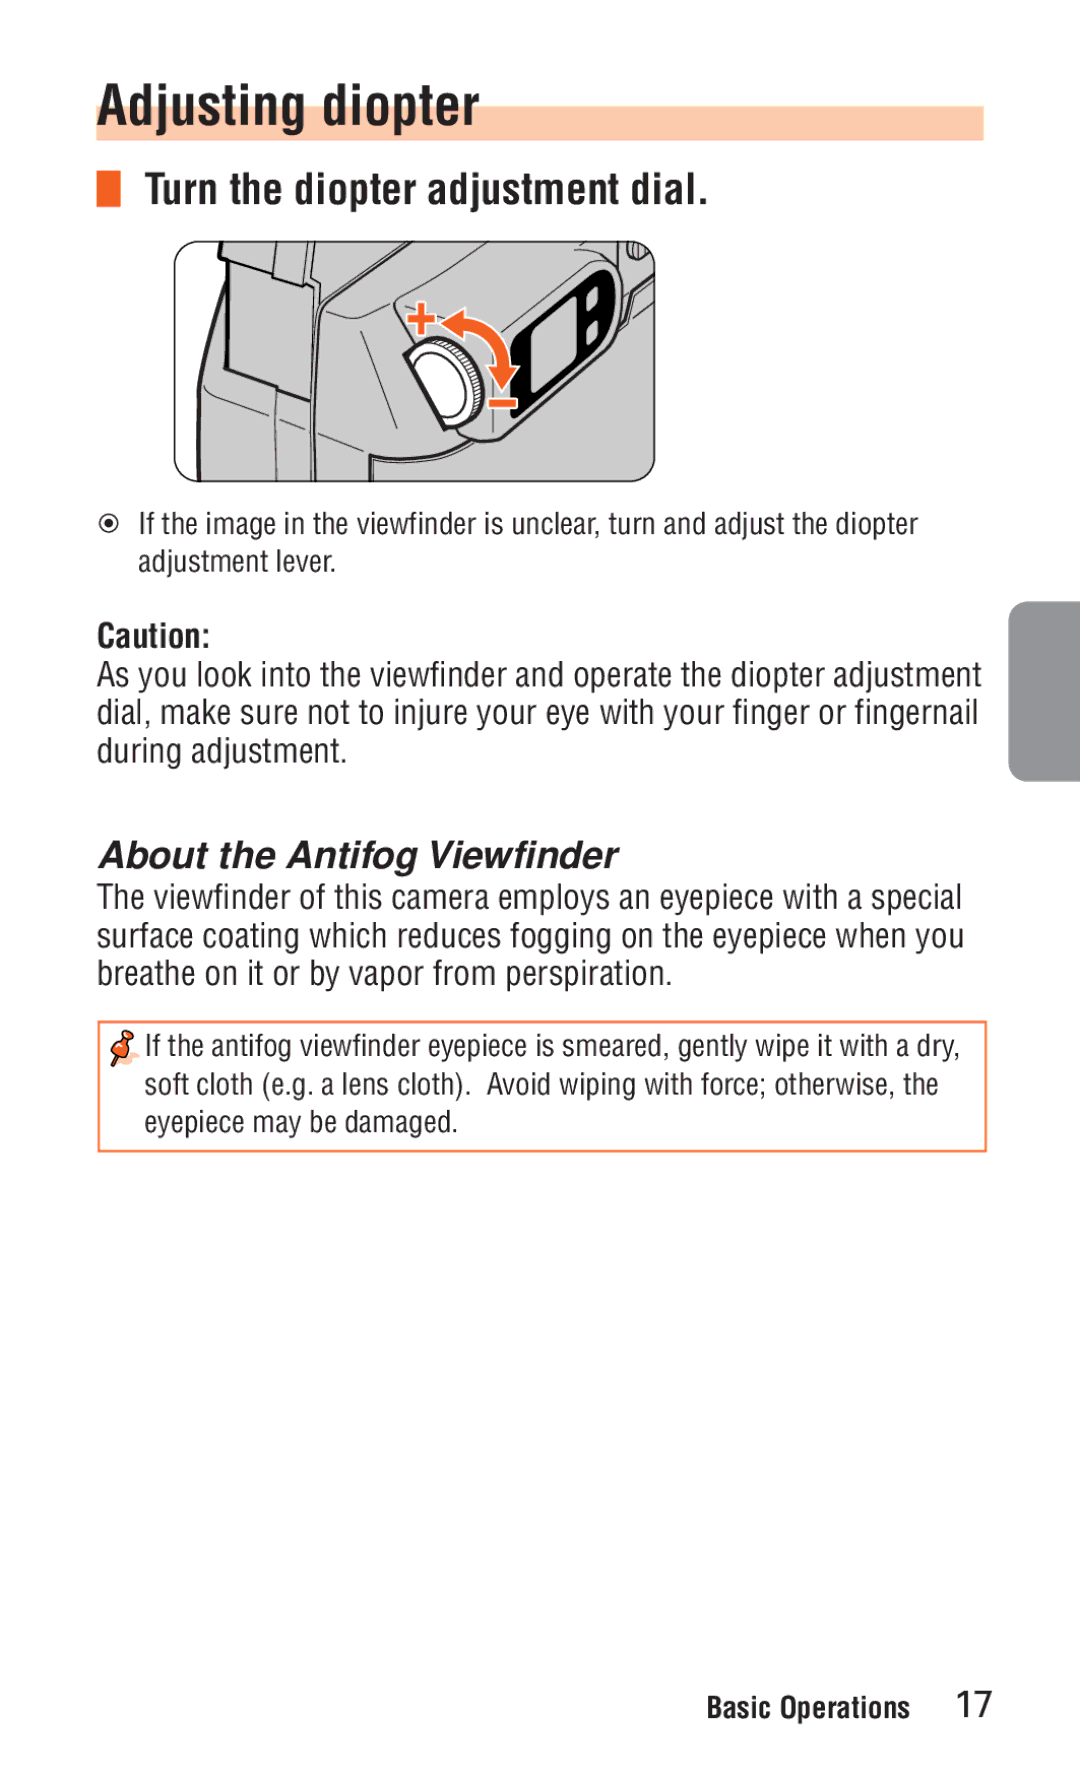 Nikon ED 120 instruction manual Adjusting diopter, Turn the diopter adjustment dial, About the Antifog Viewfinder 